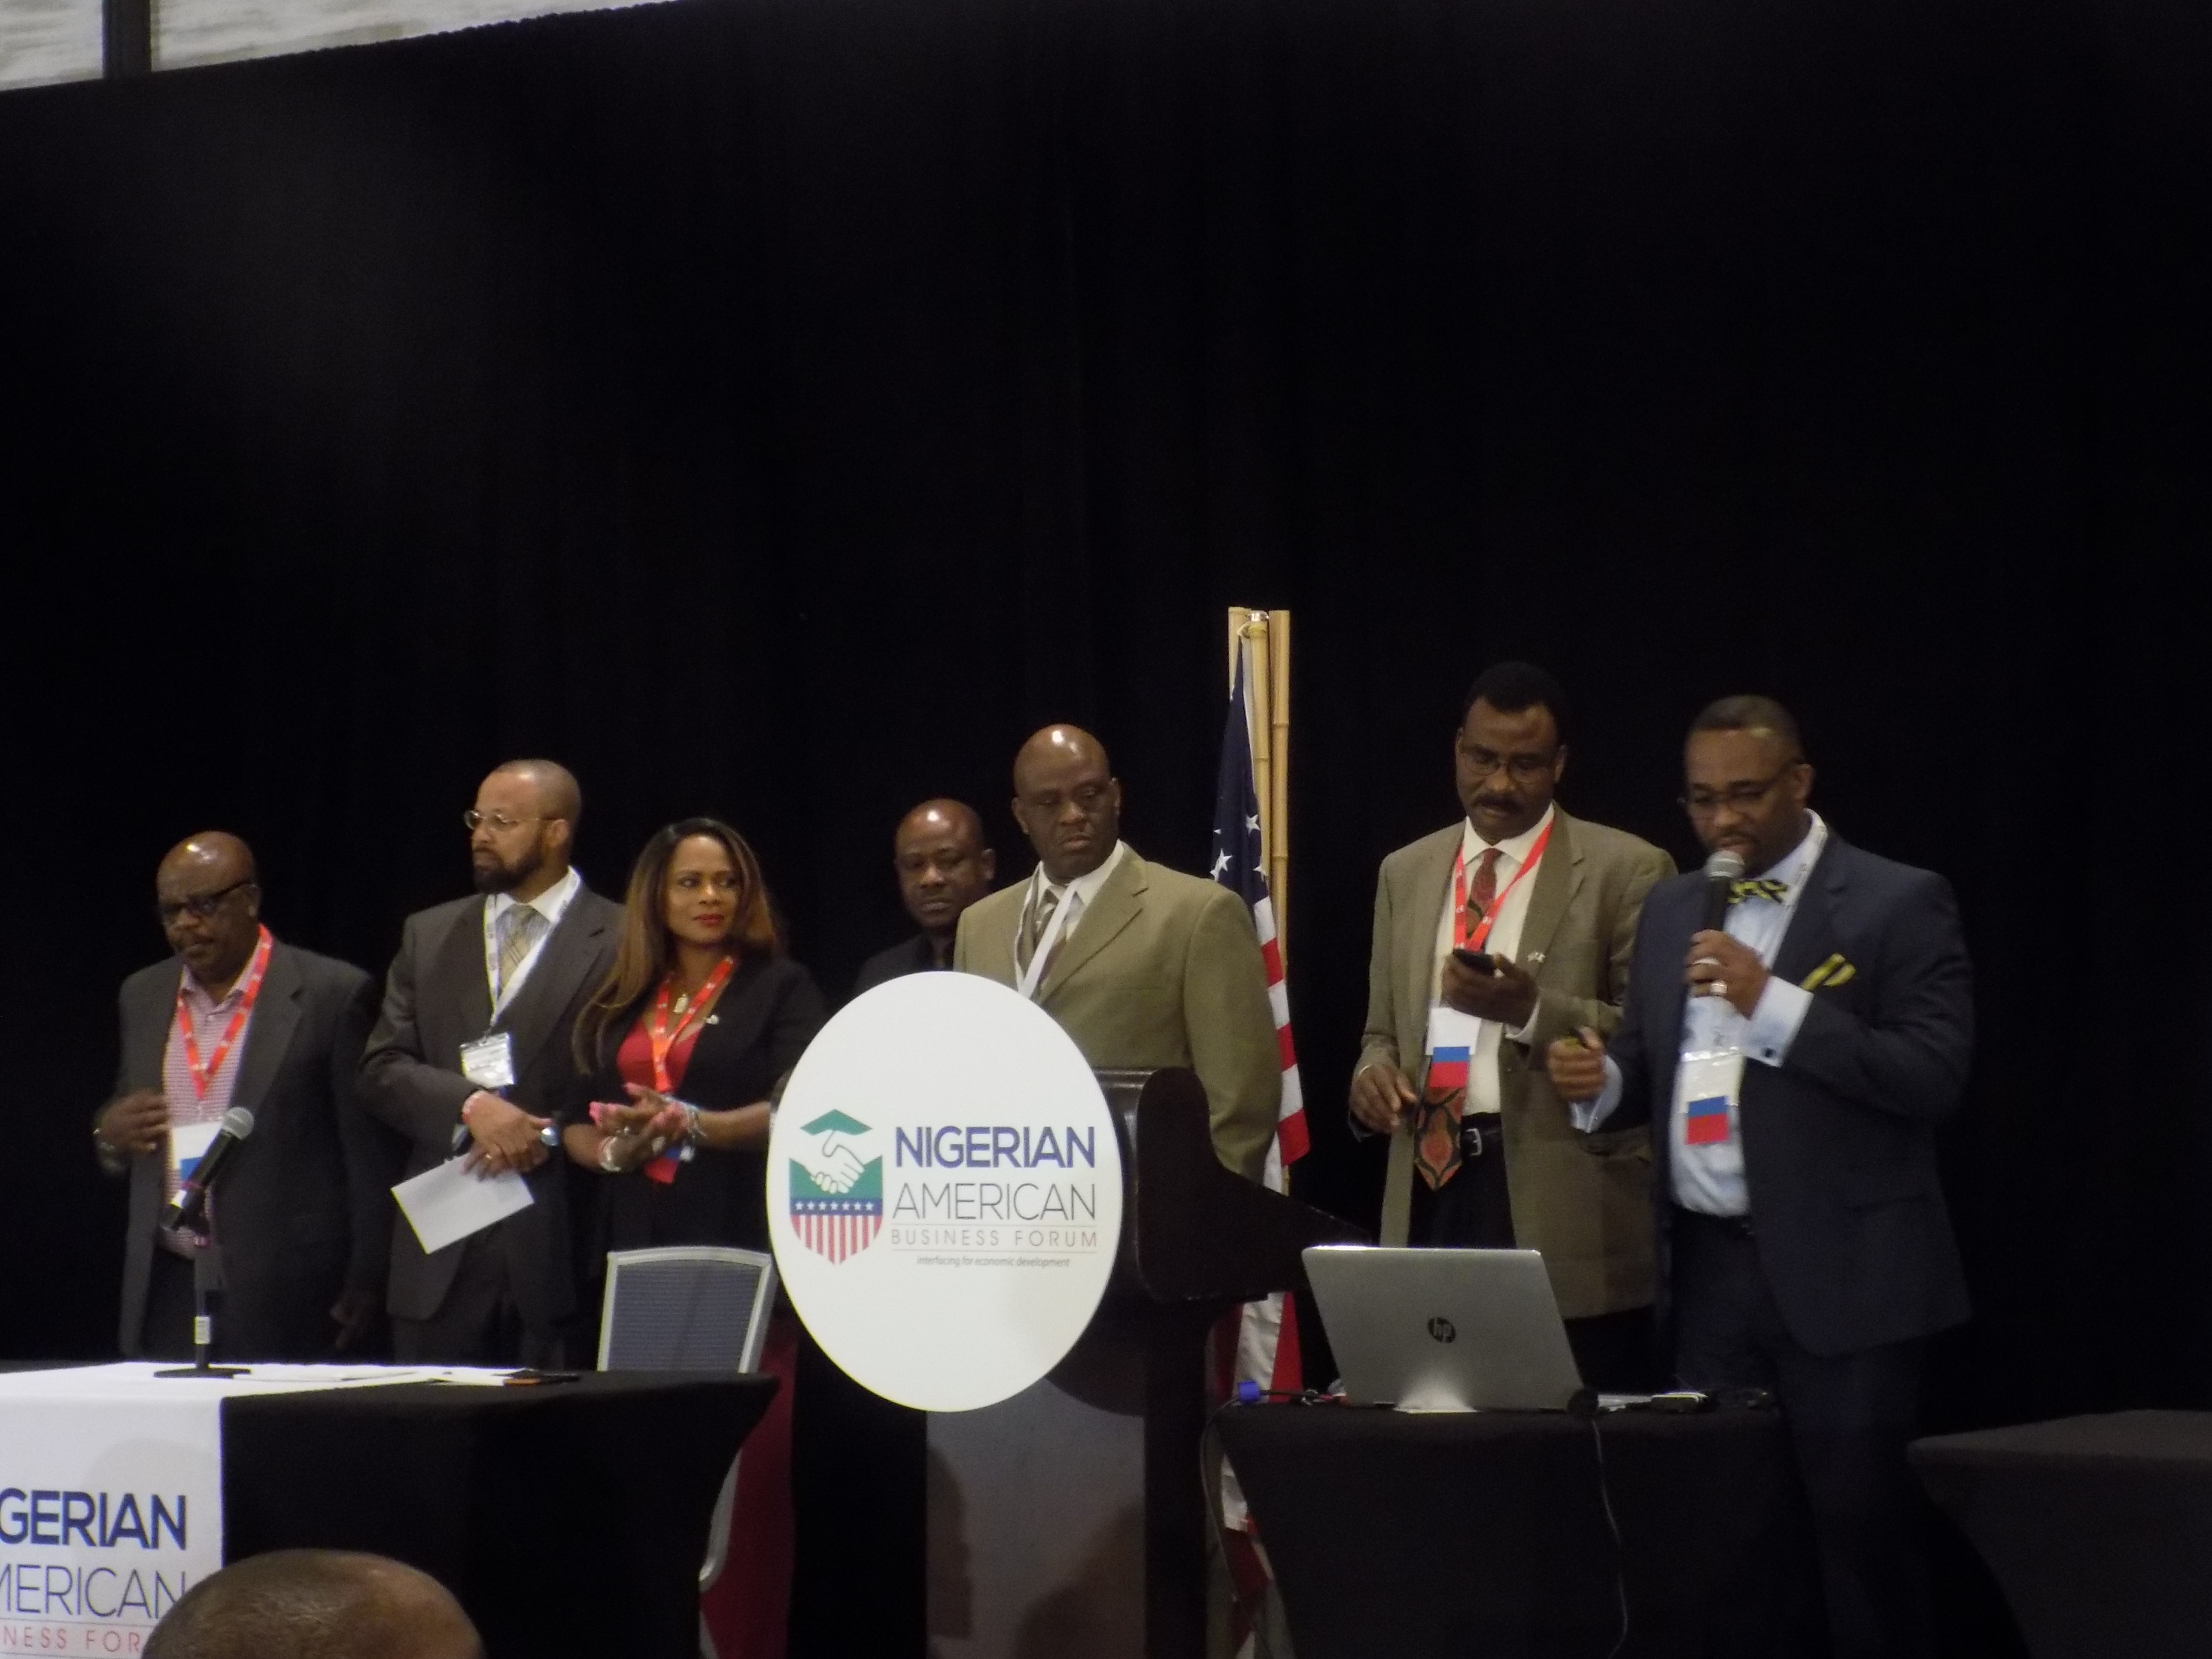 Some members of the Infrastructure and Technology work group constituted by the Nigerian-American Business Forum to find solutions to the infrastructure challenge in Nigeria